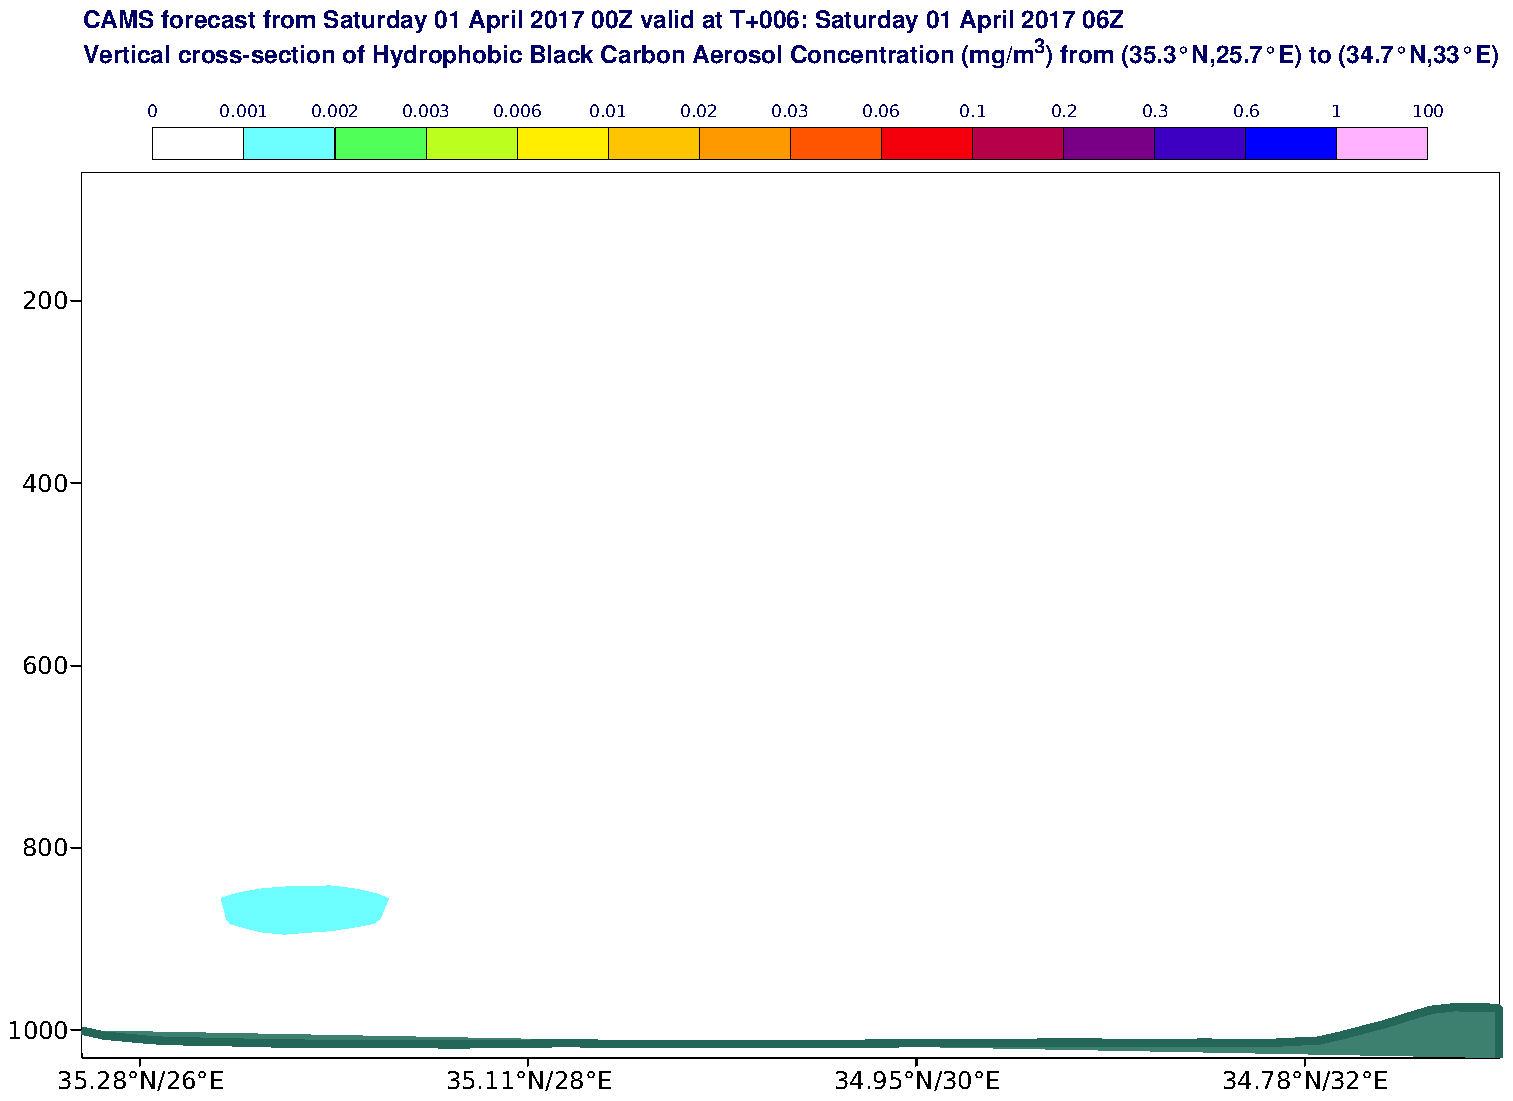 Vertical cross-section of Hydrophobic Black Carbon Aerosol Concentration (mg/m3) valid at T6 - 2017-04-01 06:00